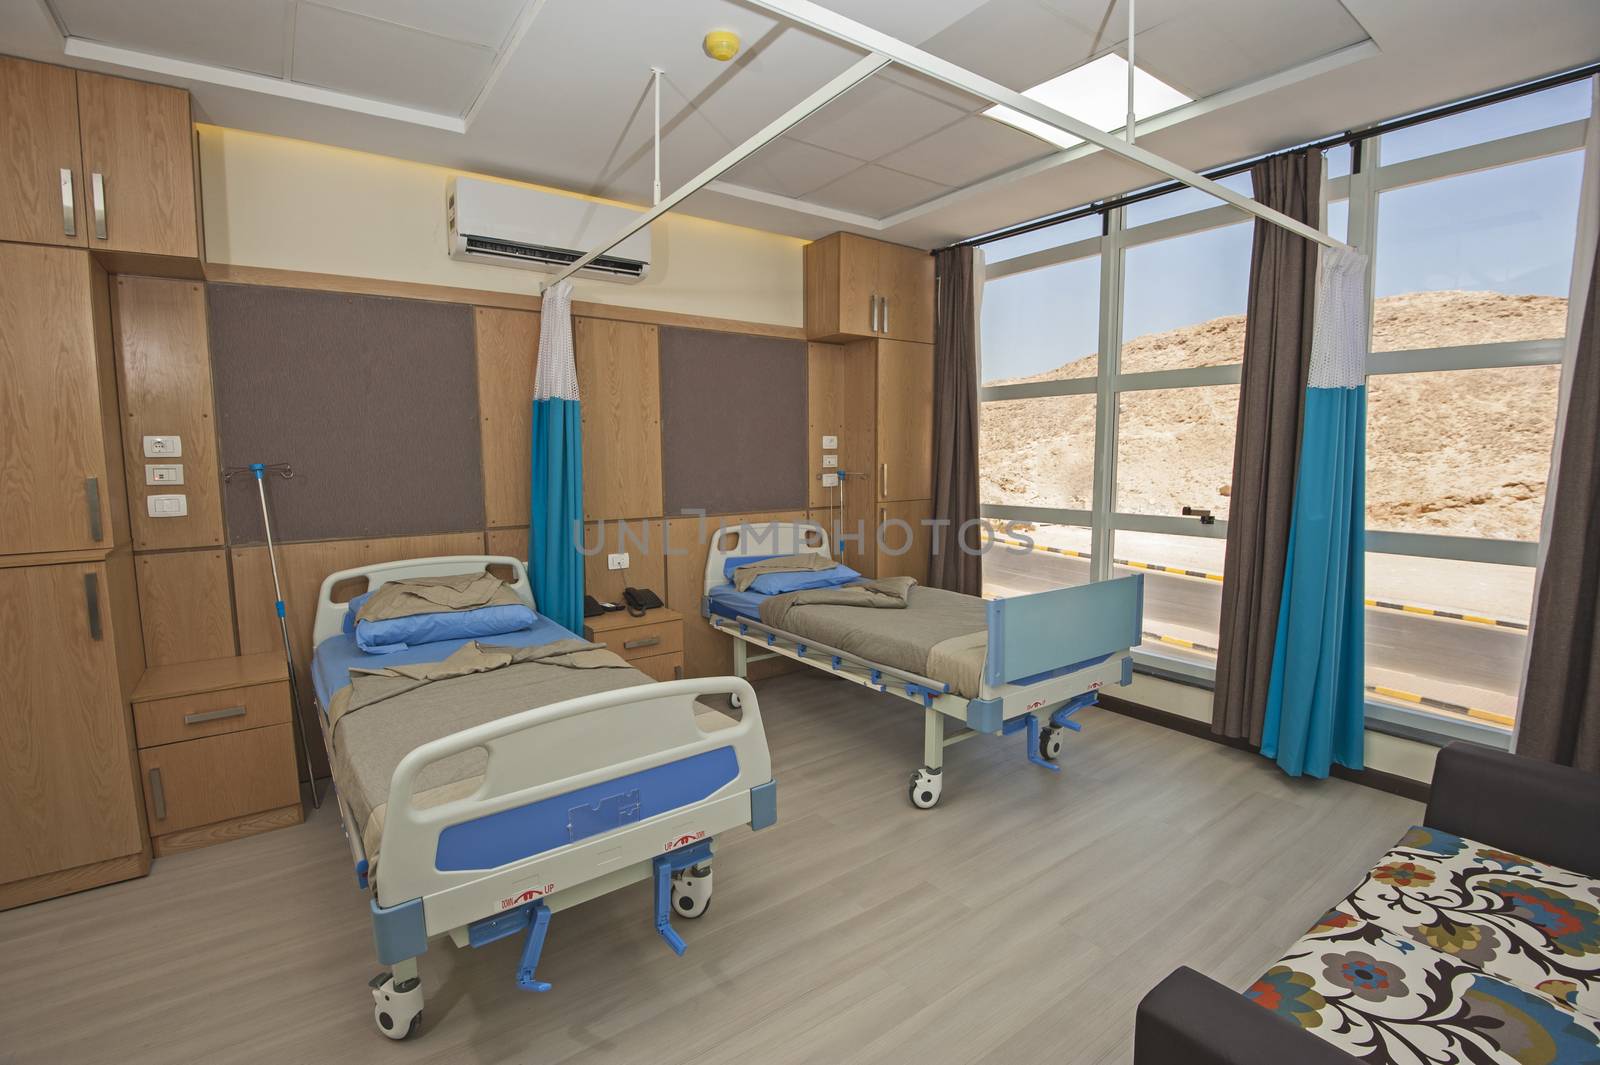 Hospital beds in a private hospital ward with sofa